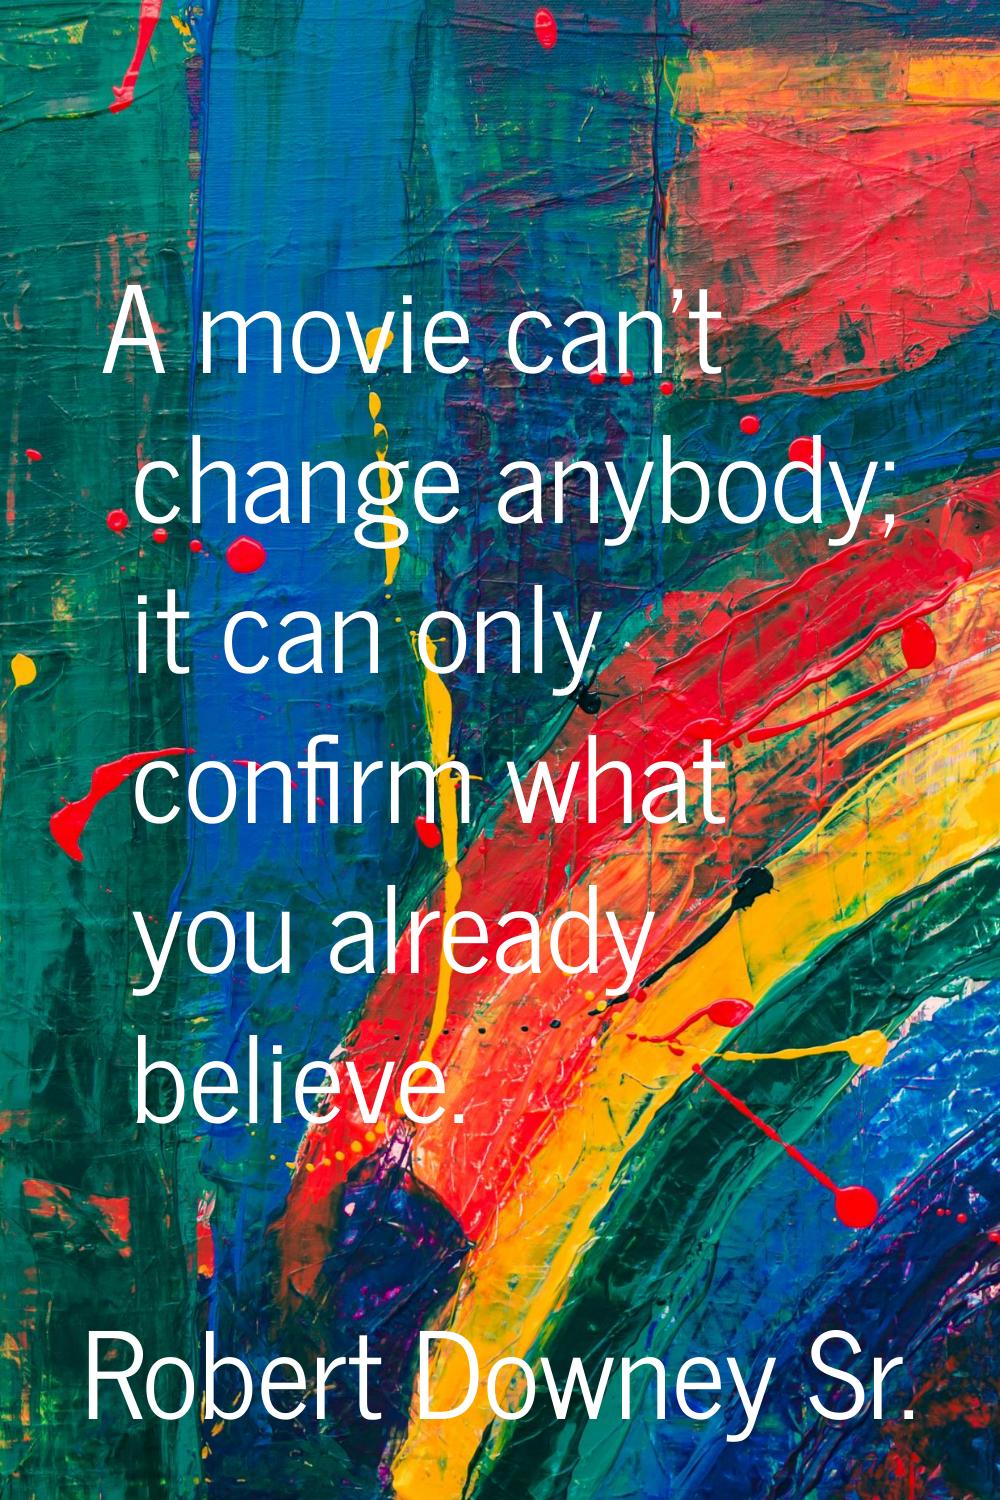 A movie can't change anybody; it can only confirm what you already believe.